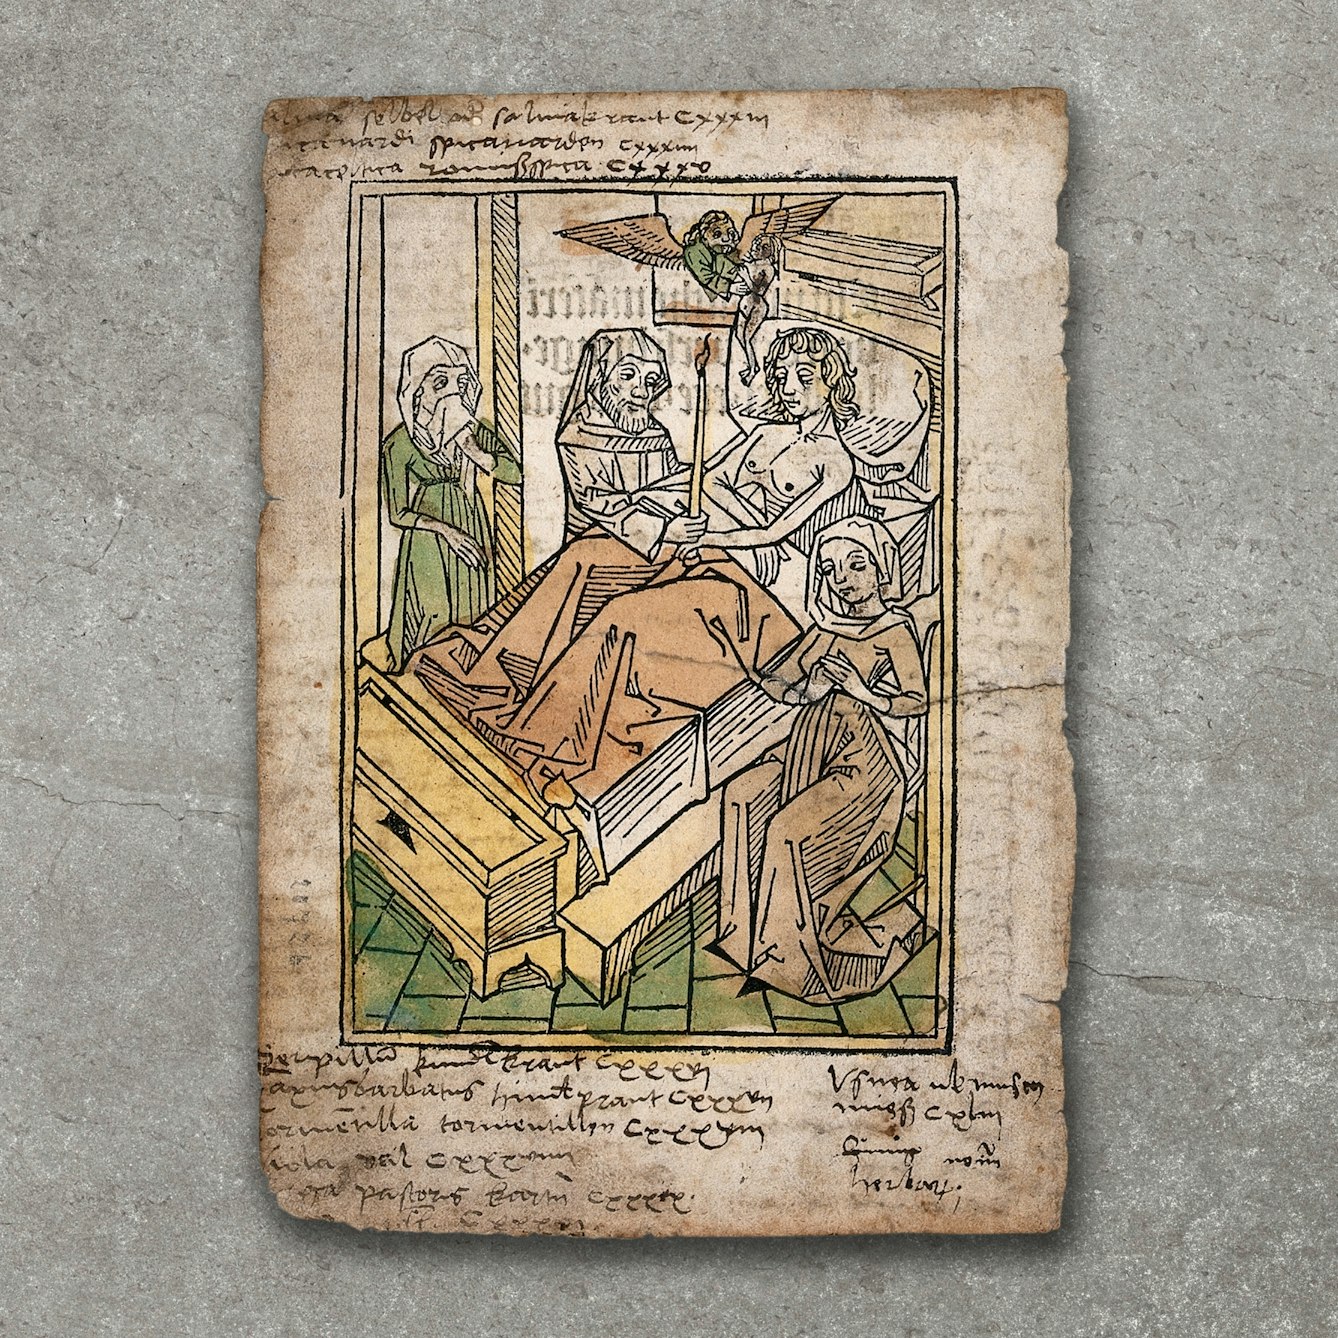 Photograph of a woodcut image, showing a man lying in bed surrounded by a priest and two women. The print is resting on a grey textured concrete background, raised slightly off the surface.